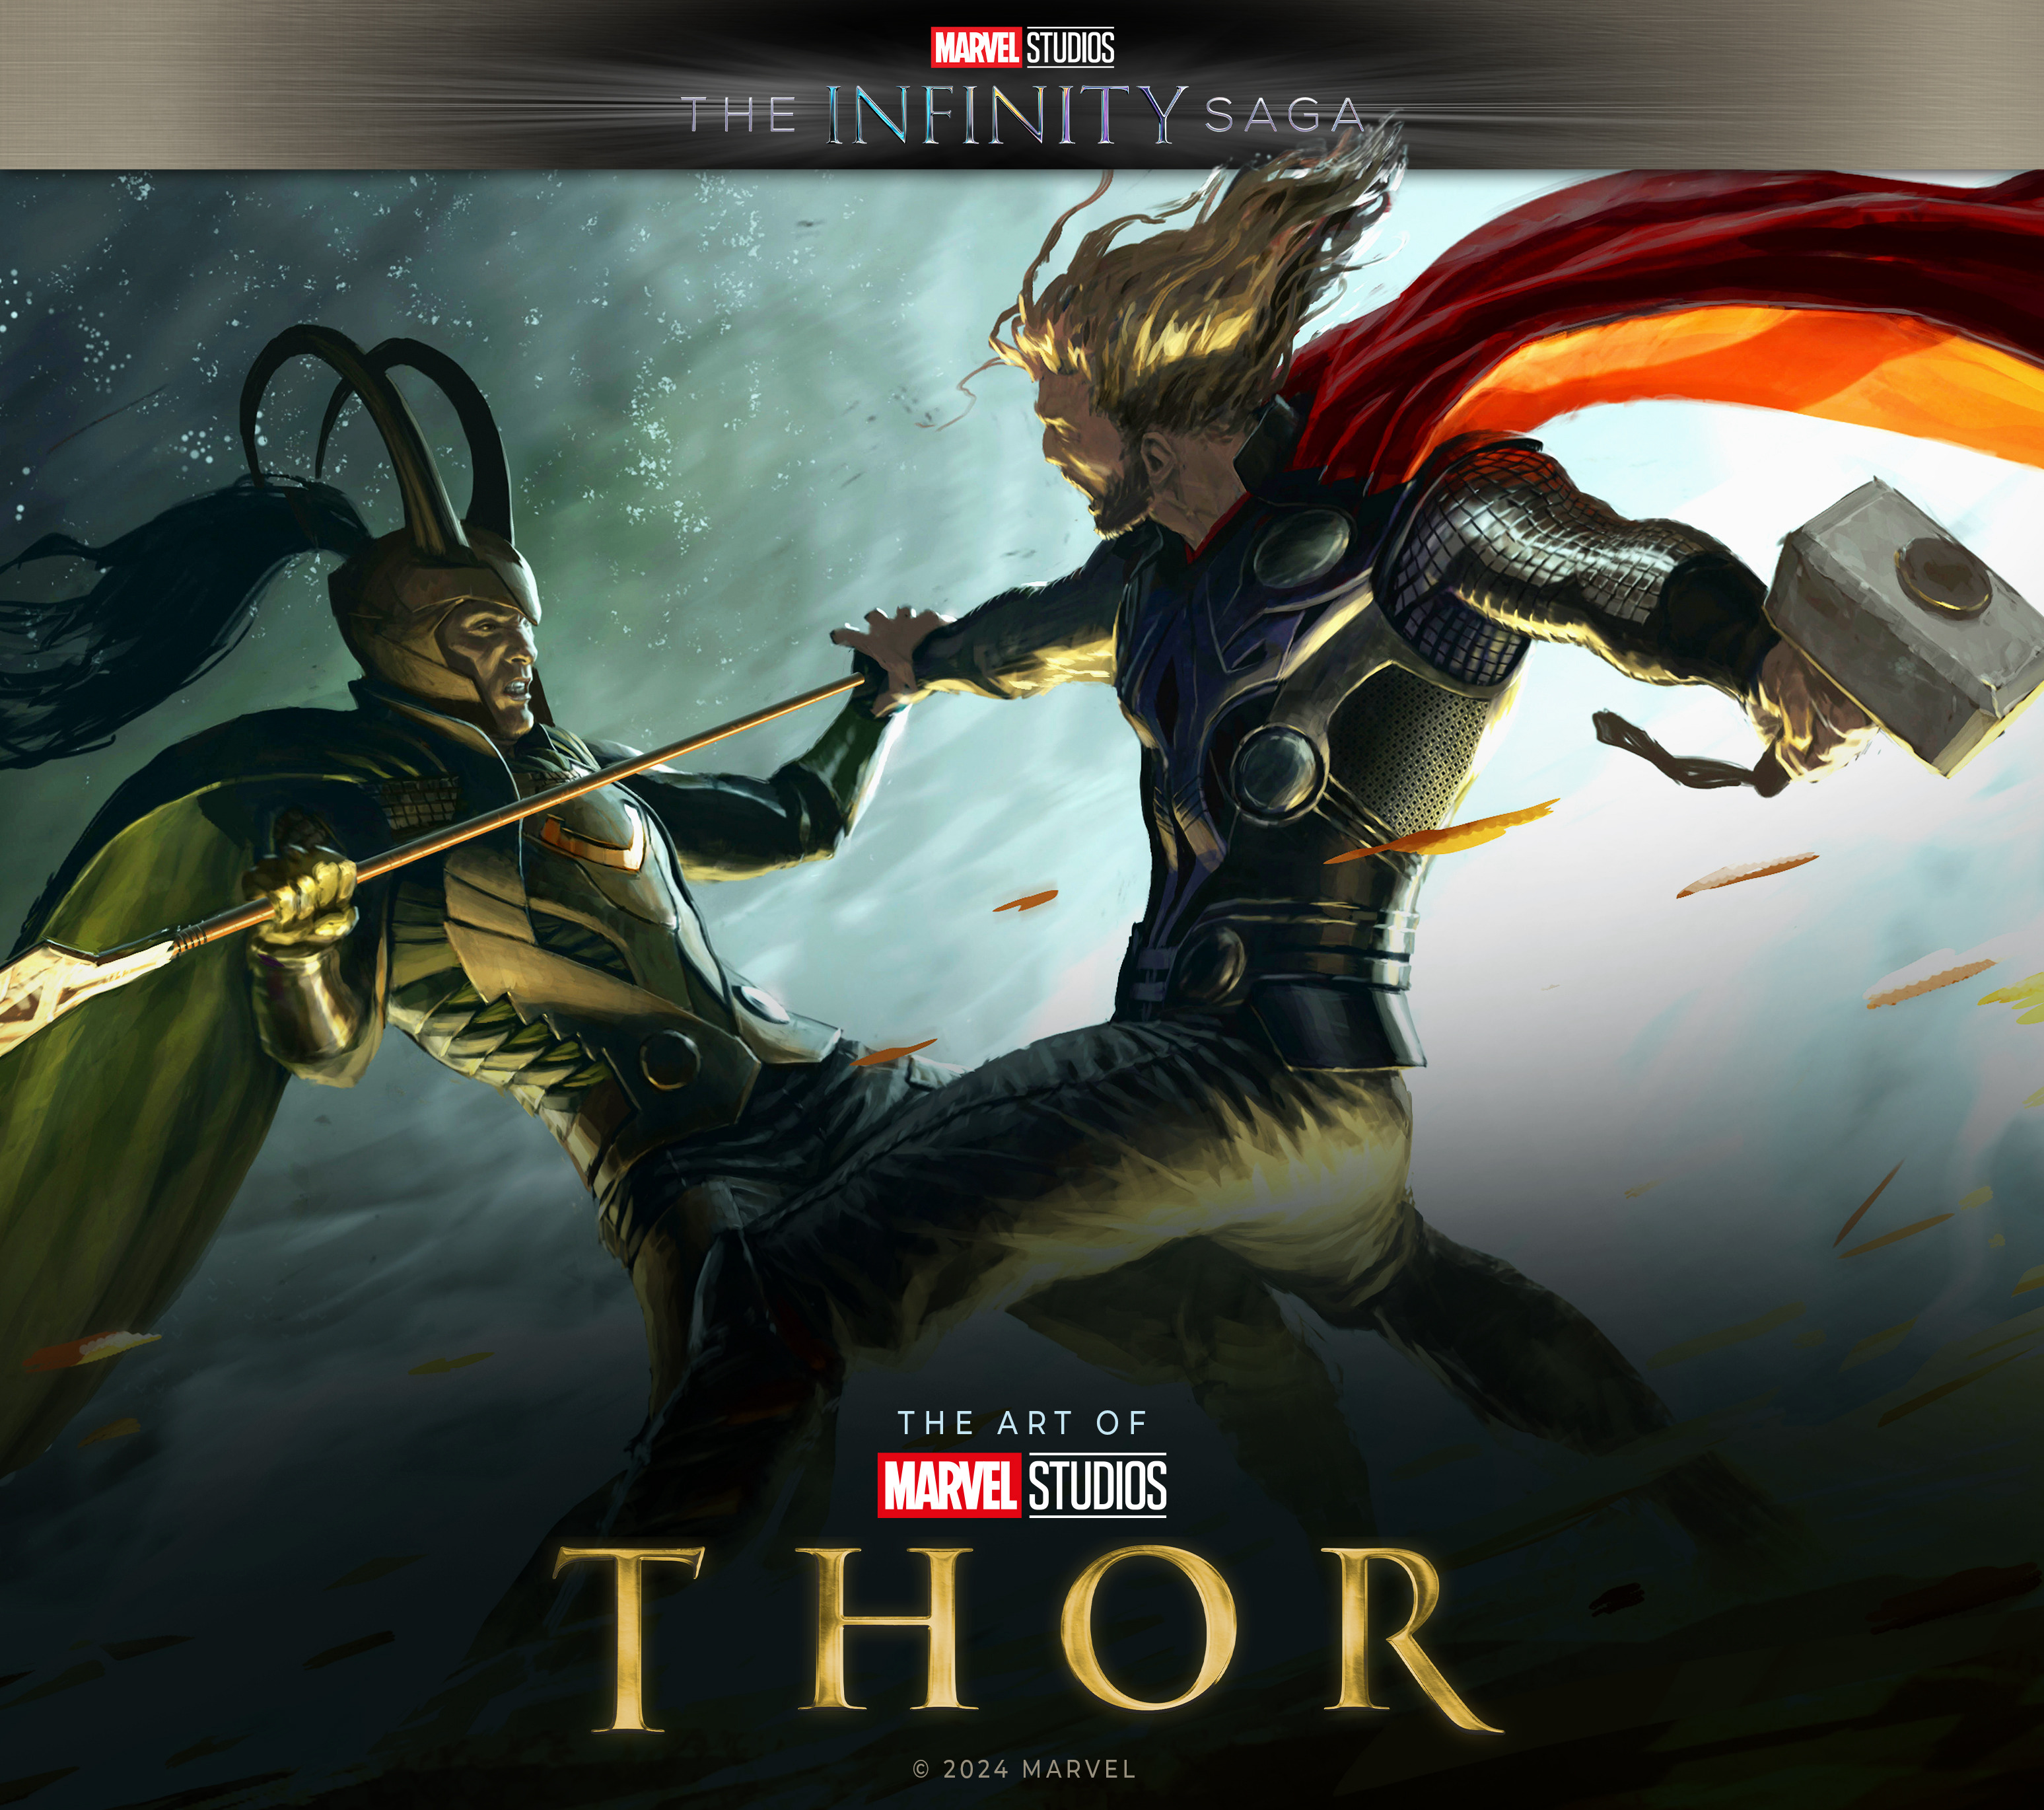 Cover of Marvel Studios' The Infinity Saga - Thor: The Art of the Movie